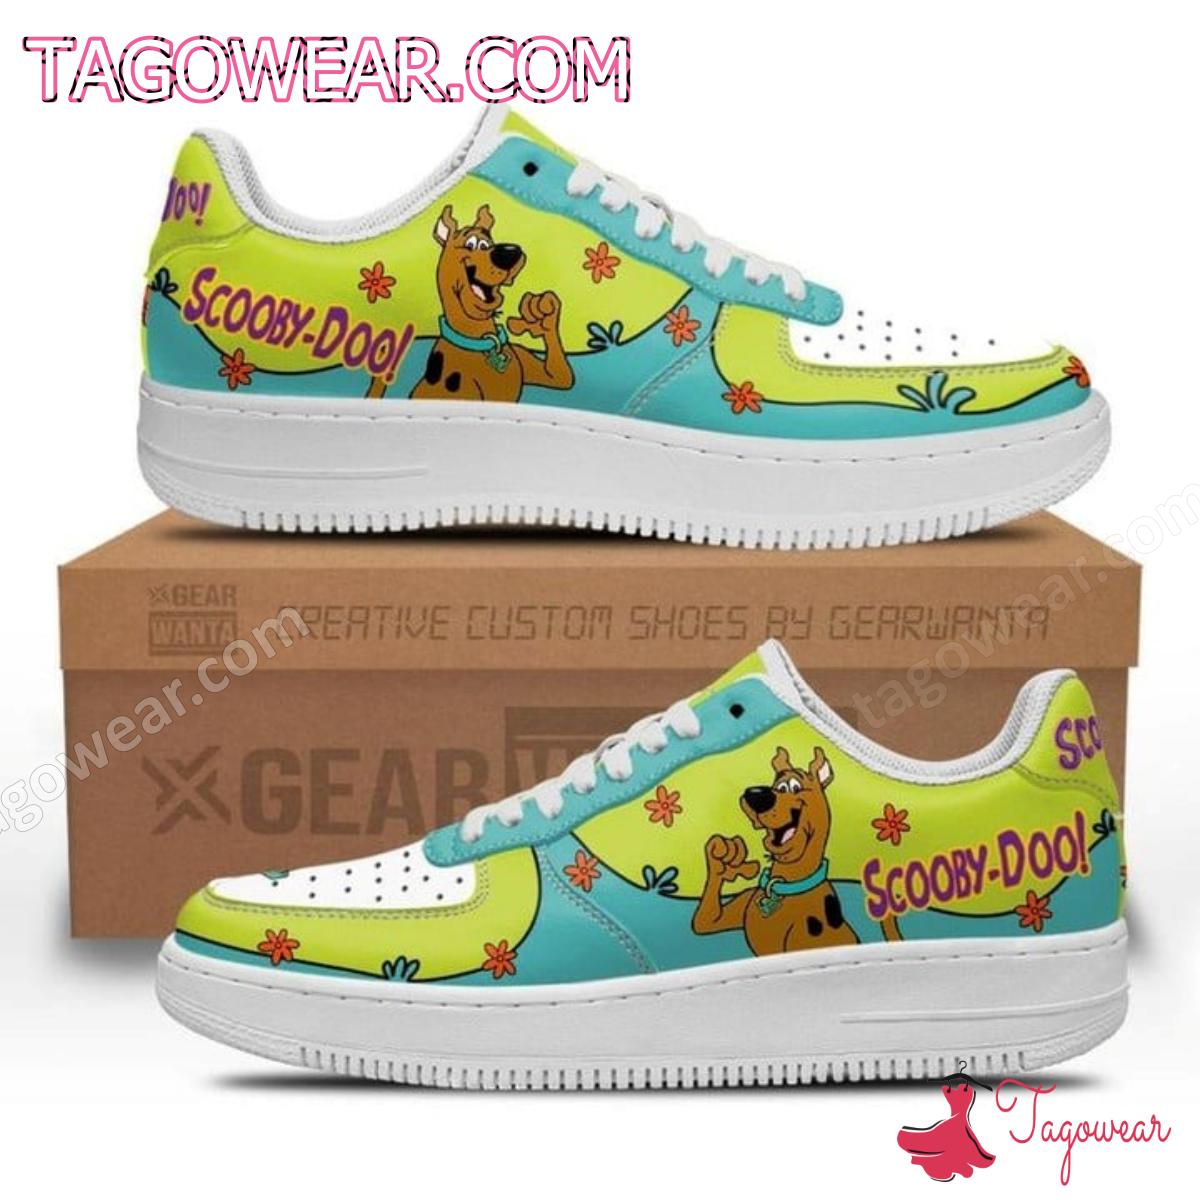 Scooby-doo Cartoon Air Force Shoes